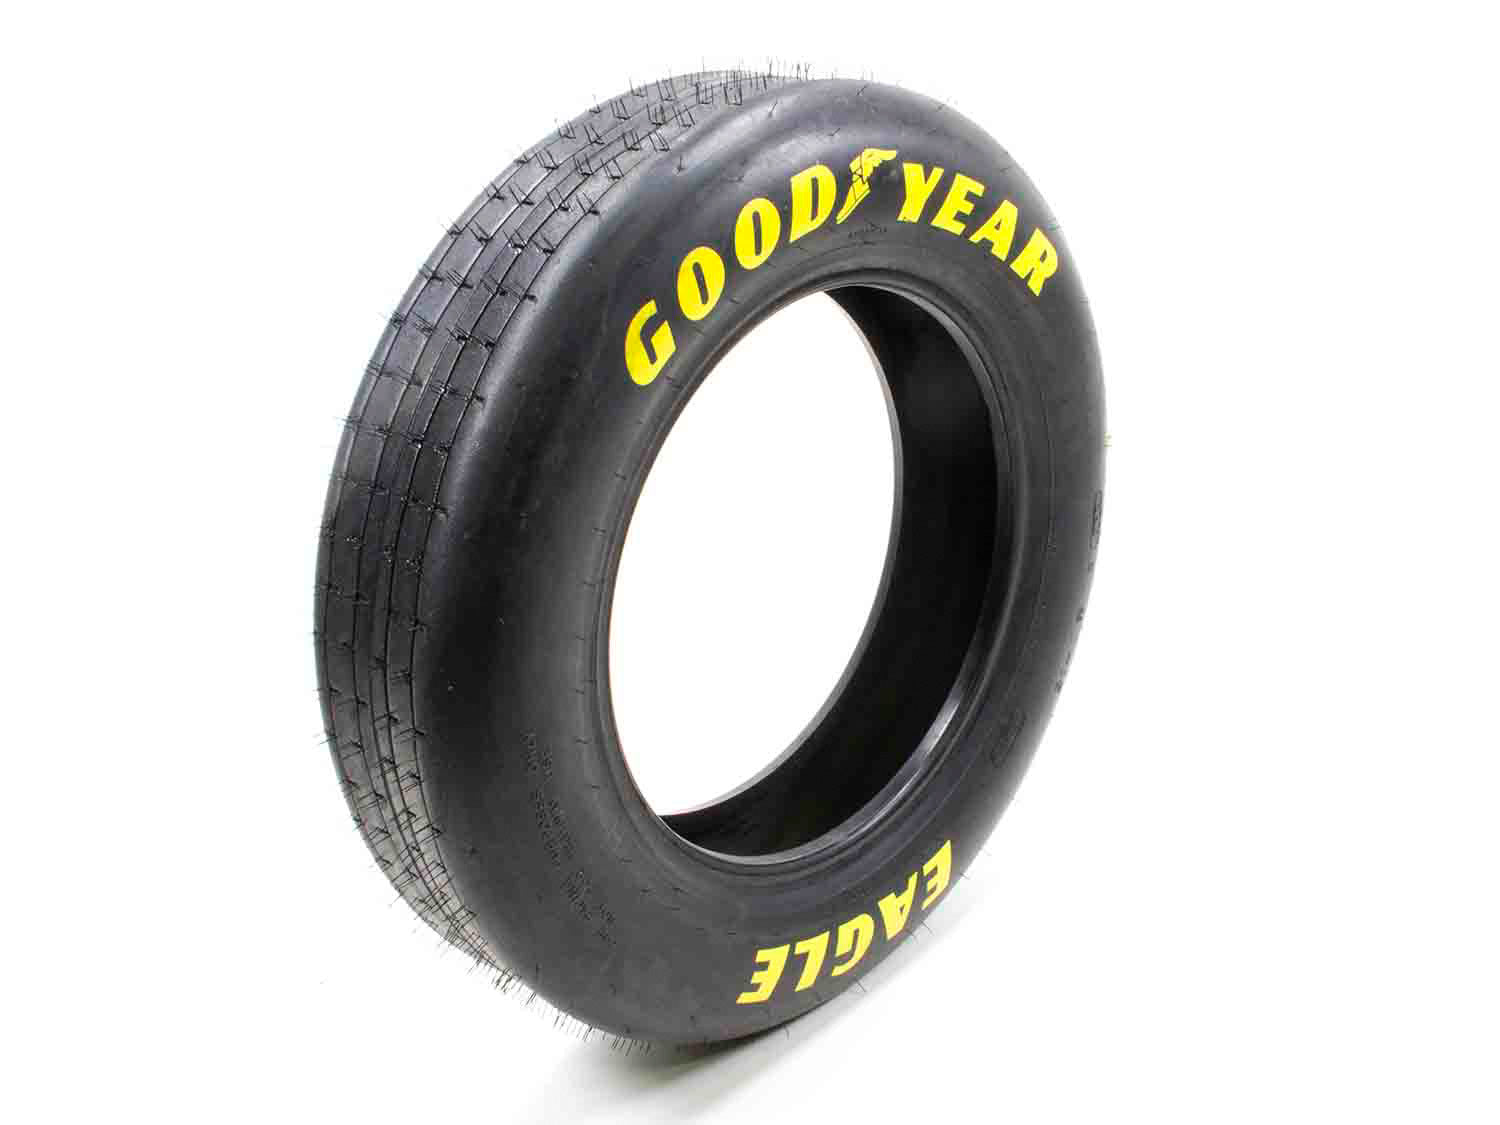 Goodyear 24.0/5.0-15 Front Runner GDYD1962